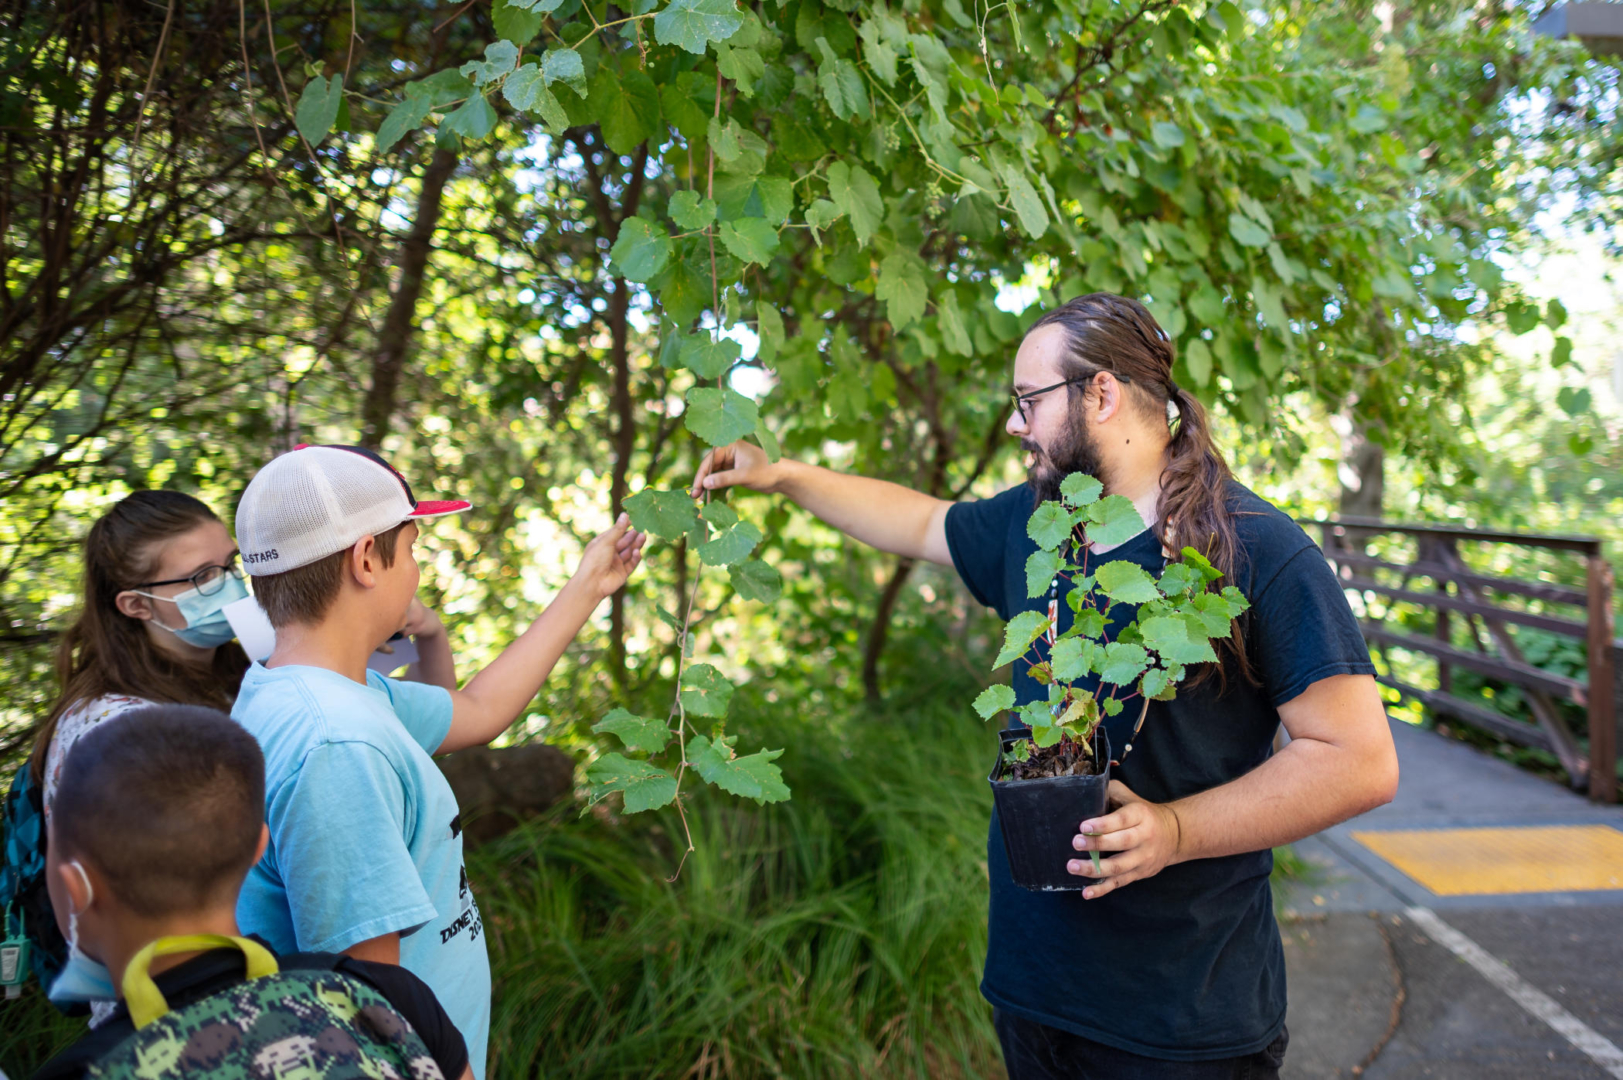 He-Lo Ramirez holds out a branch of wild grapes for students to touch near a campus bridge.